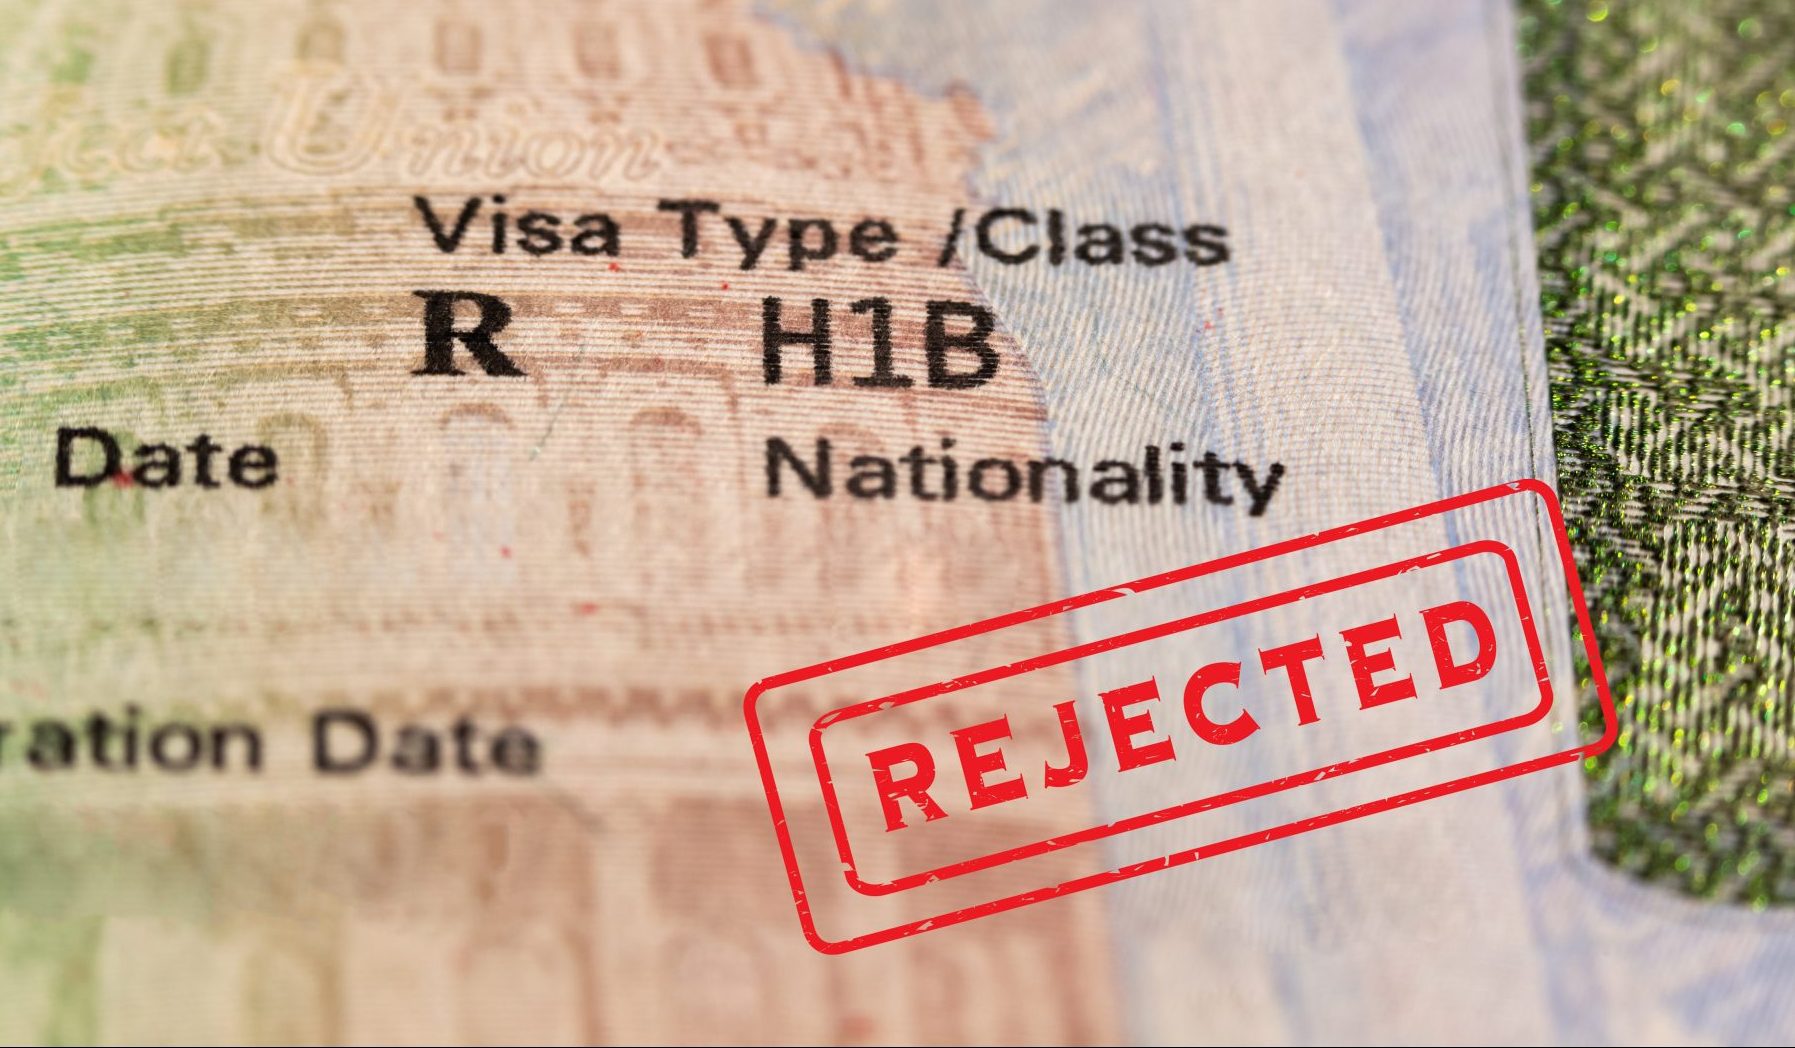 New Ban on Non-Immigrant Visas to Impact H-1B, H-2B, J-1, and L-1 Visa Applicants